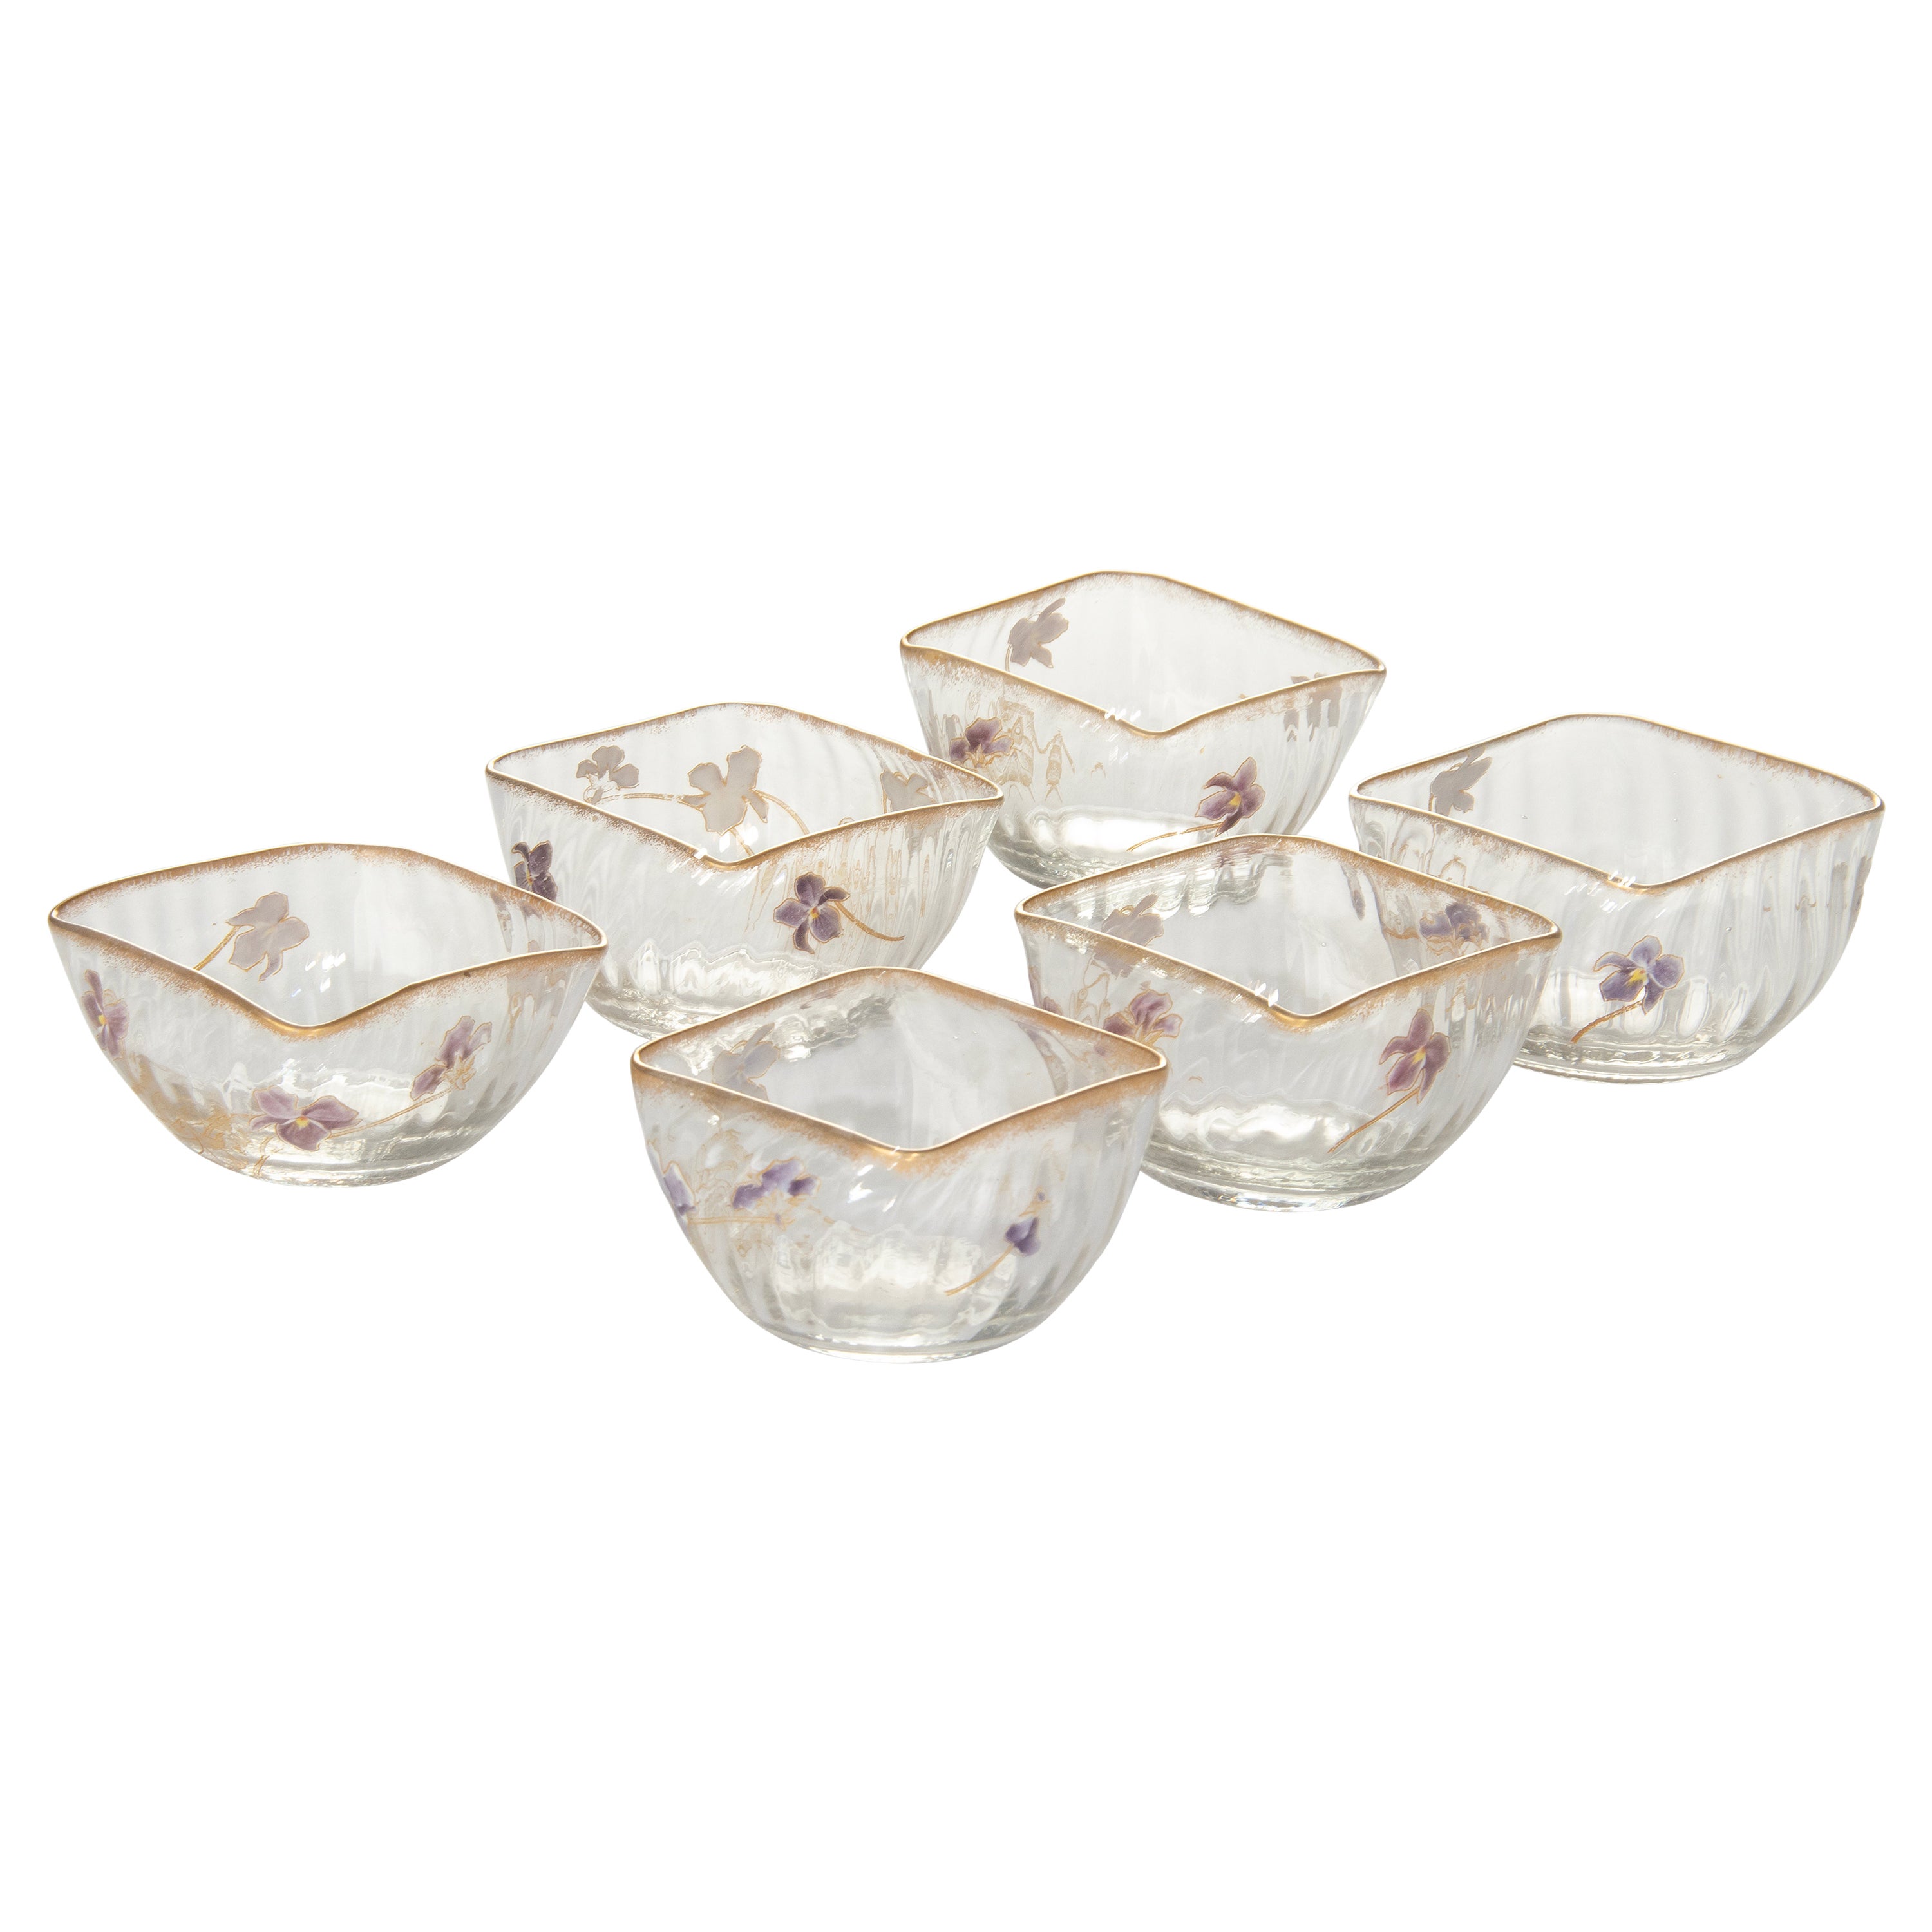 Set of 6 Crystal Art Nouveau Bowls Hand Painted with Flowers Attr. to Daum Nancy